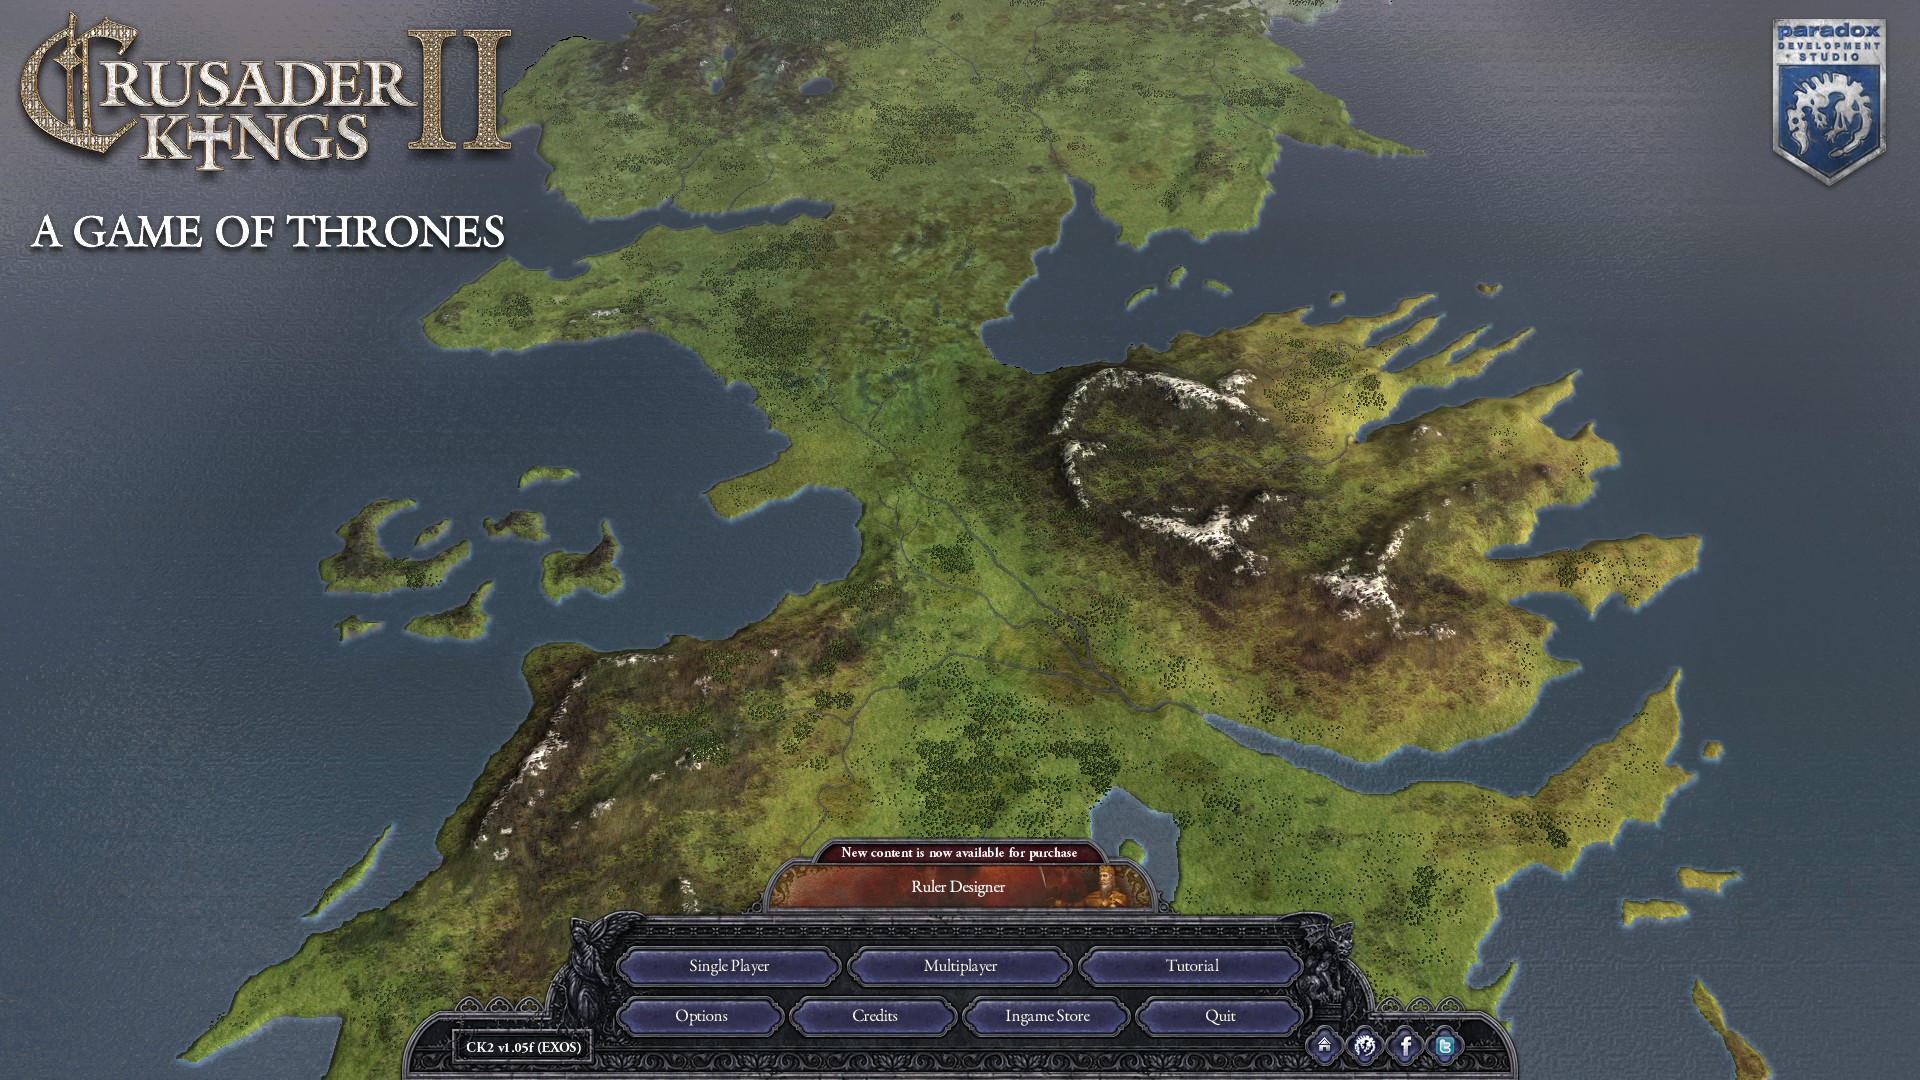 The perfect Game of Thrones game is a PC mod